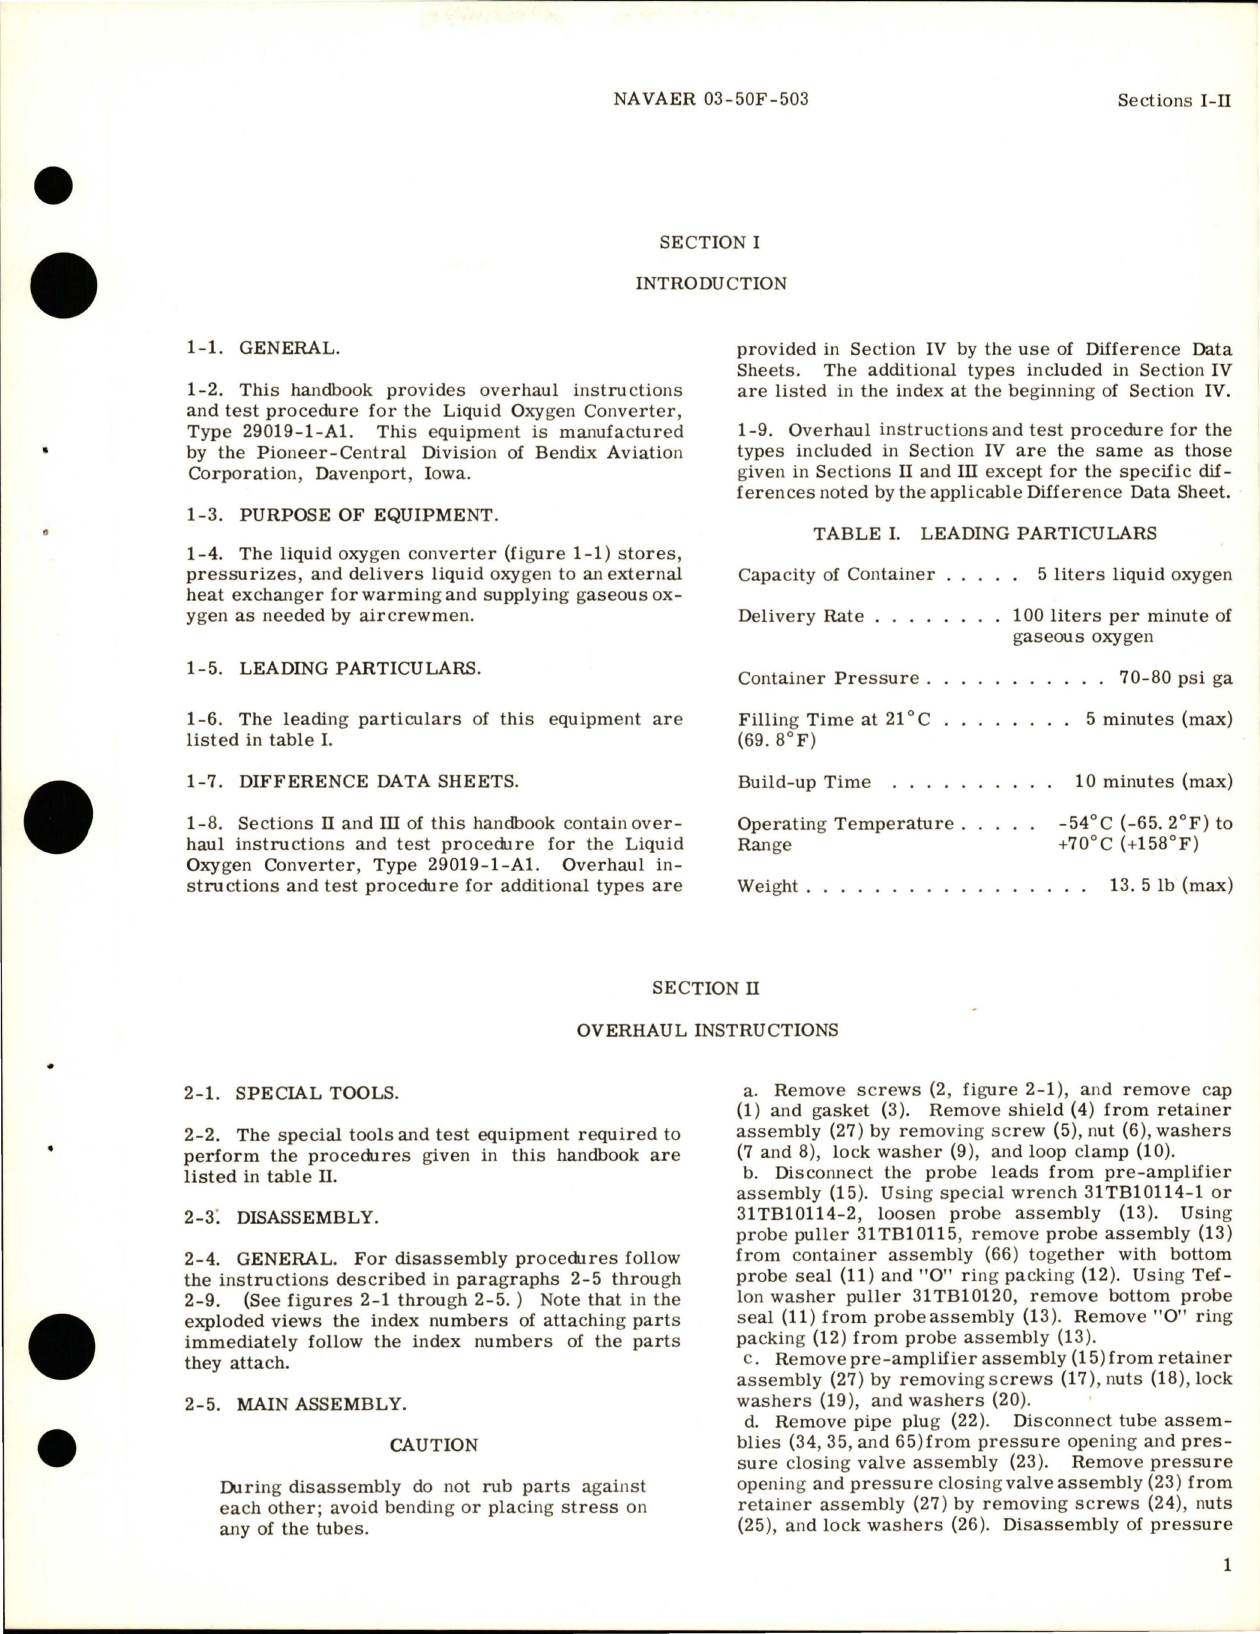 Sample page 5 from AirCorps Library document: Overhaul Instructions for Liquid Oxygen Converter - Types 29019-1-A1, 29023-1-A1, 29024-1-A1, and 29024-1-B1